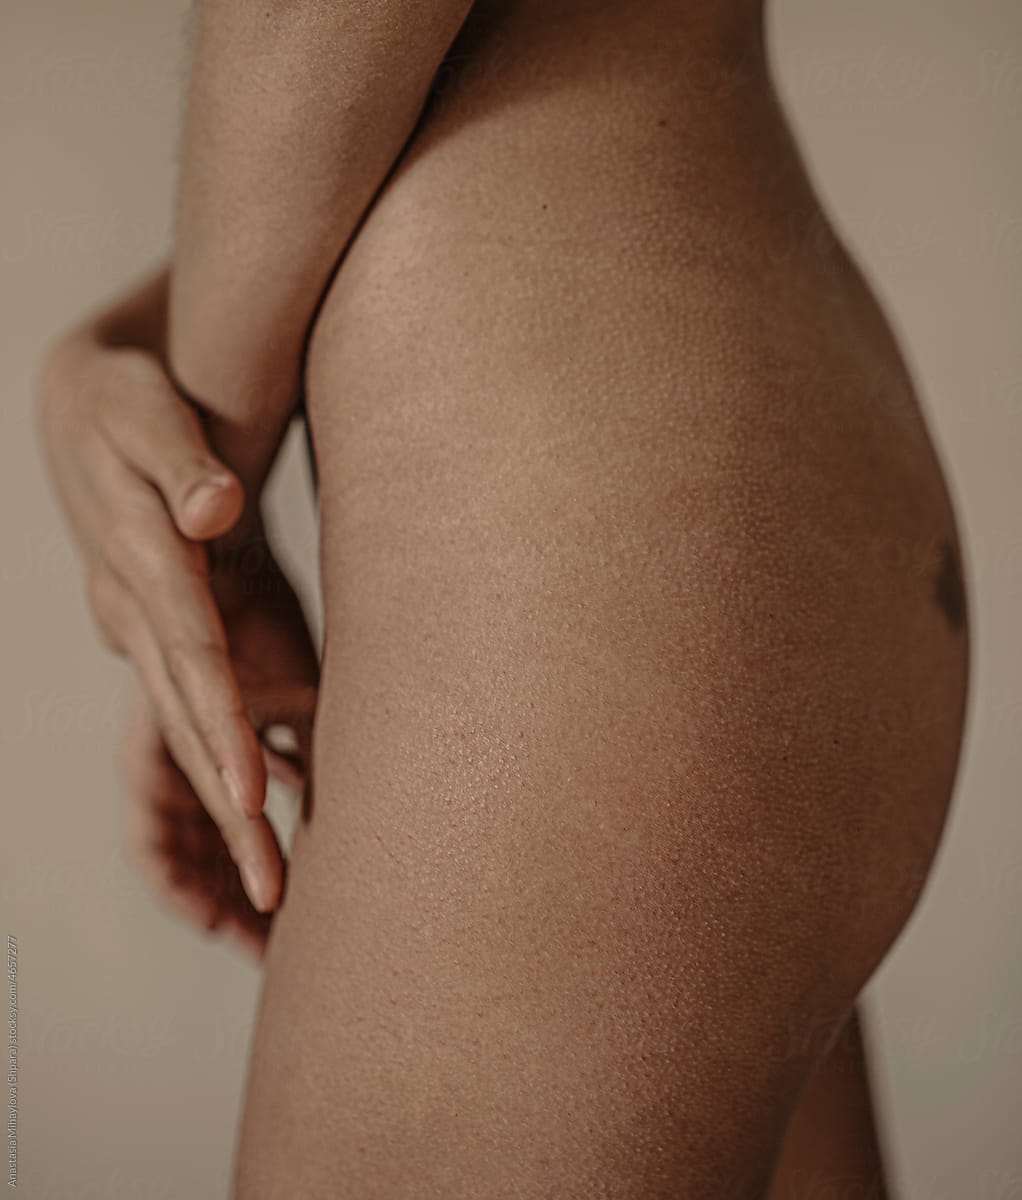 Woman With Stretch Marks On Skin